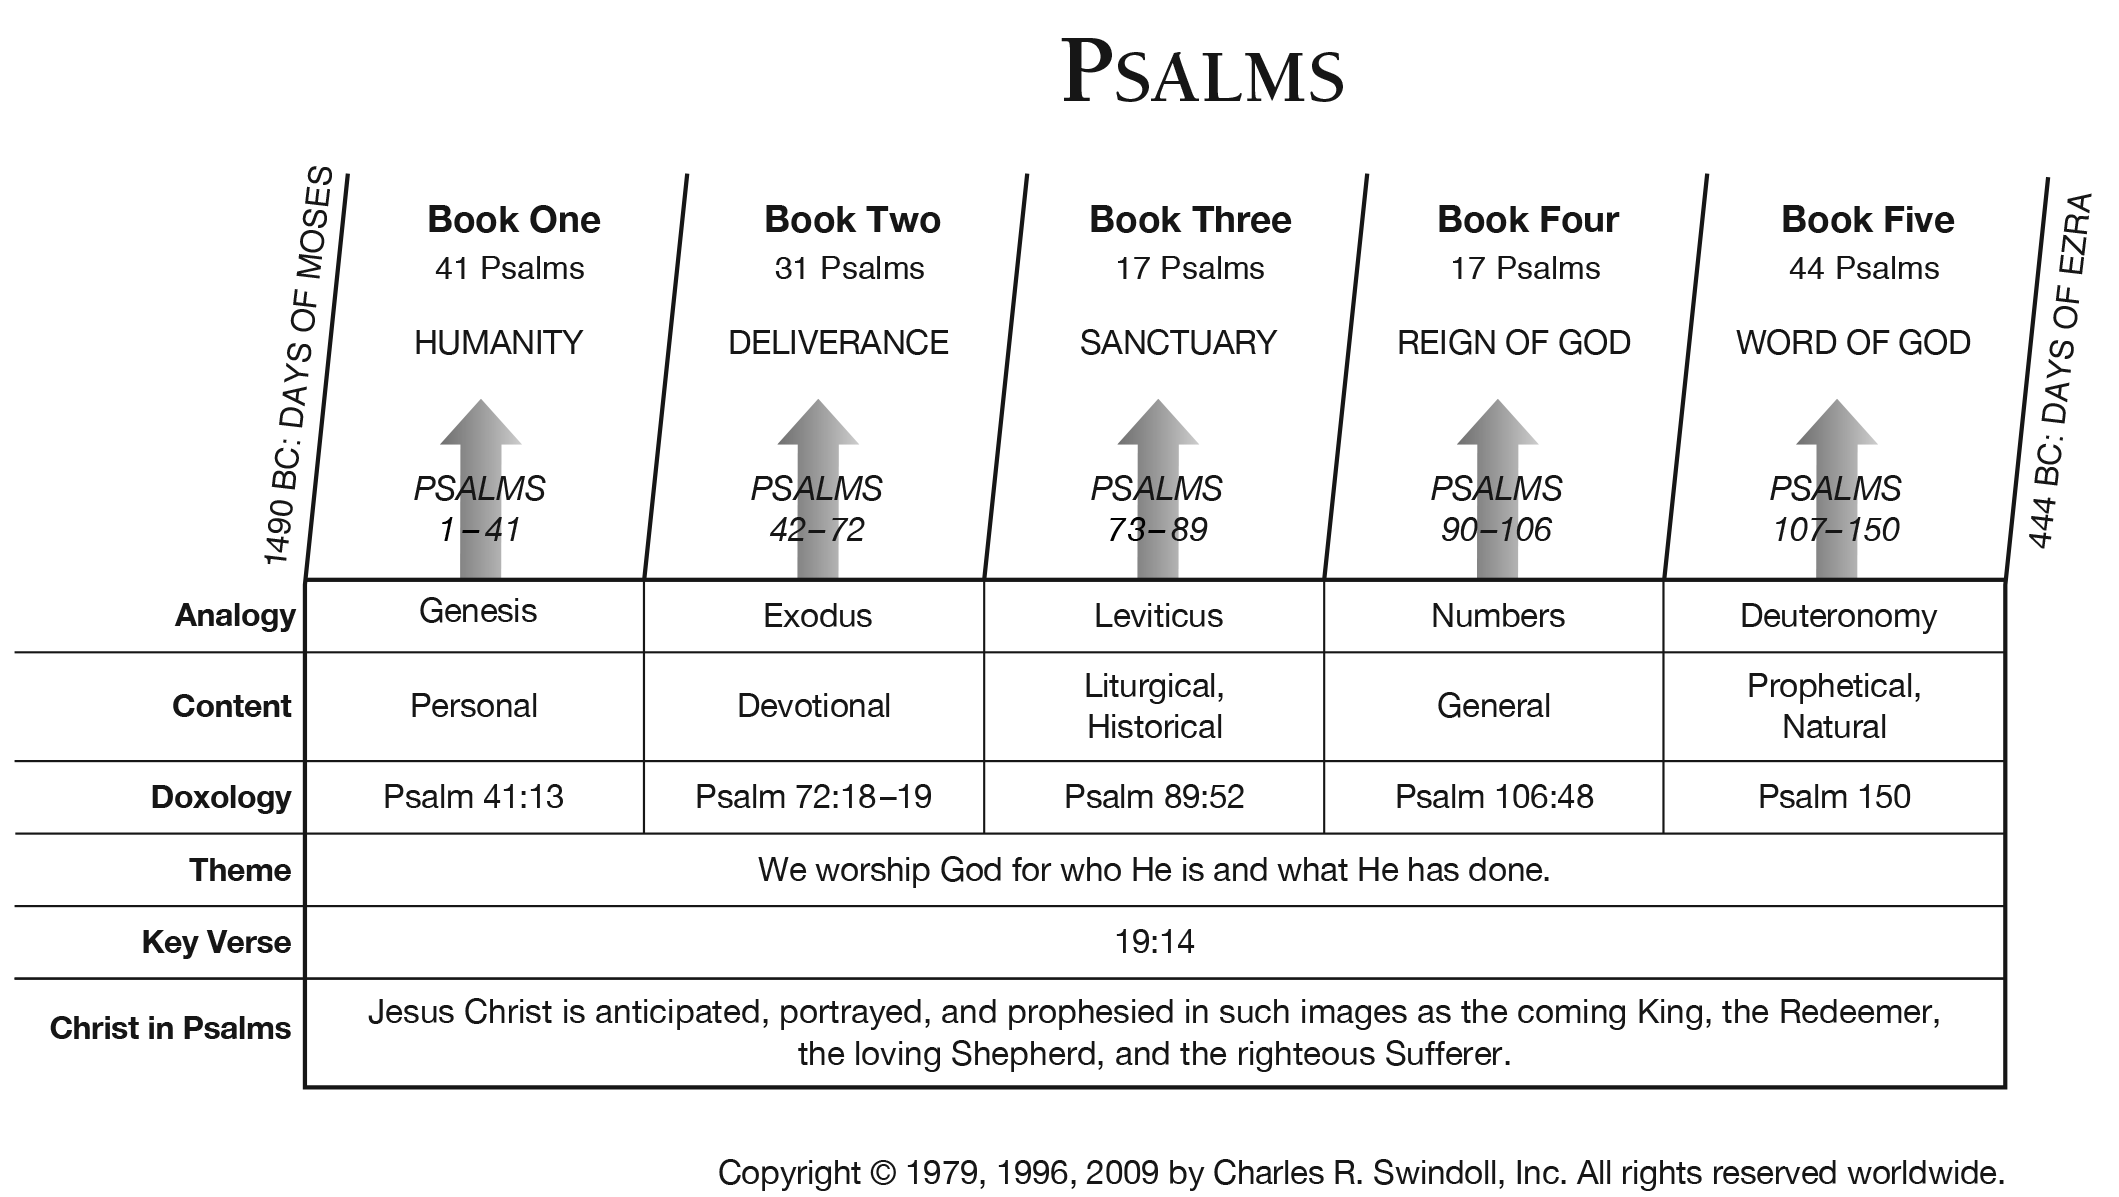 the 5 books in psalms